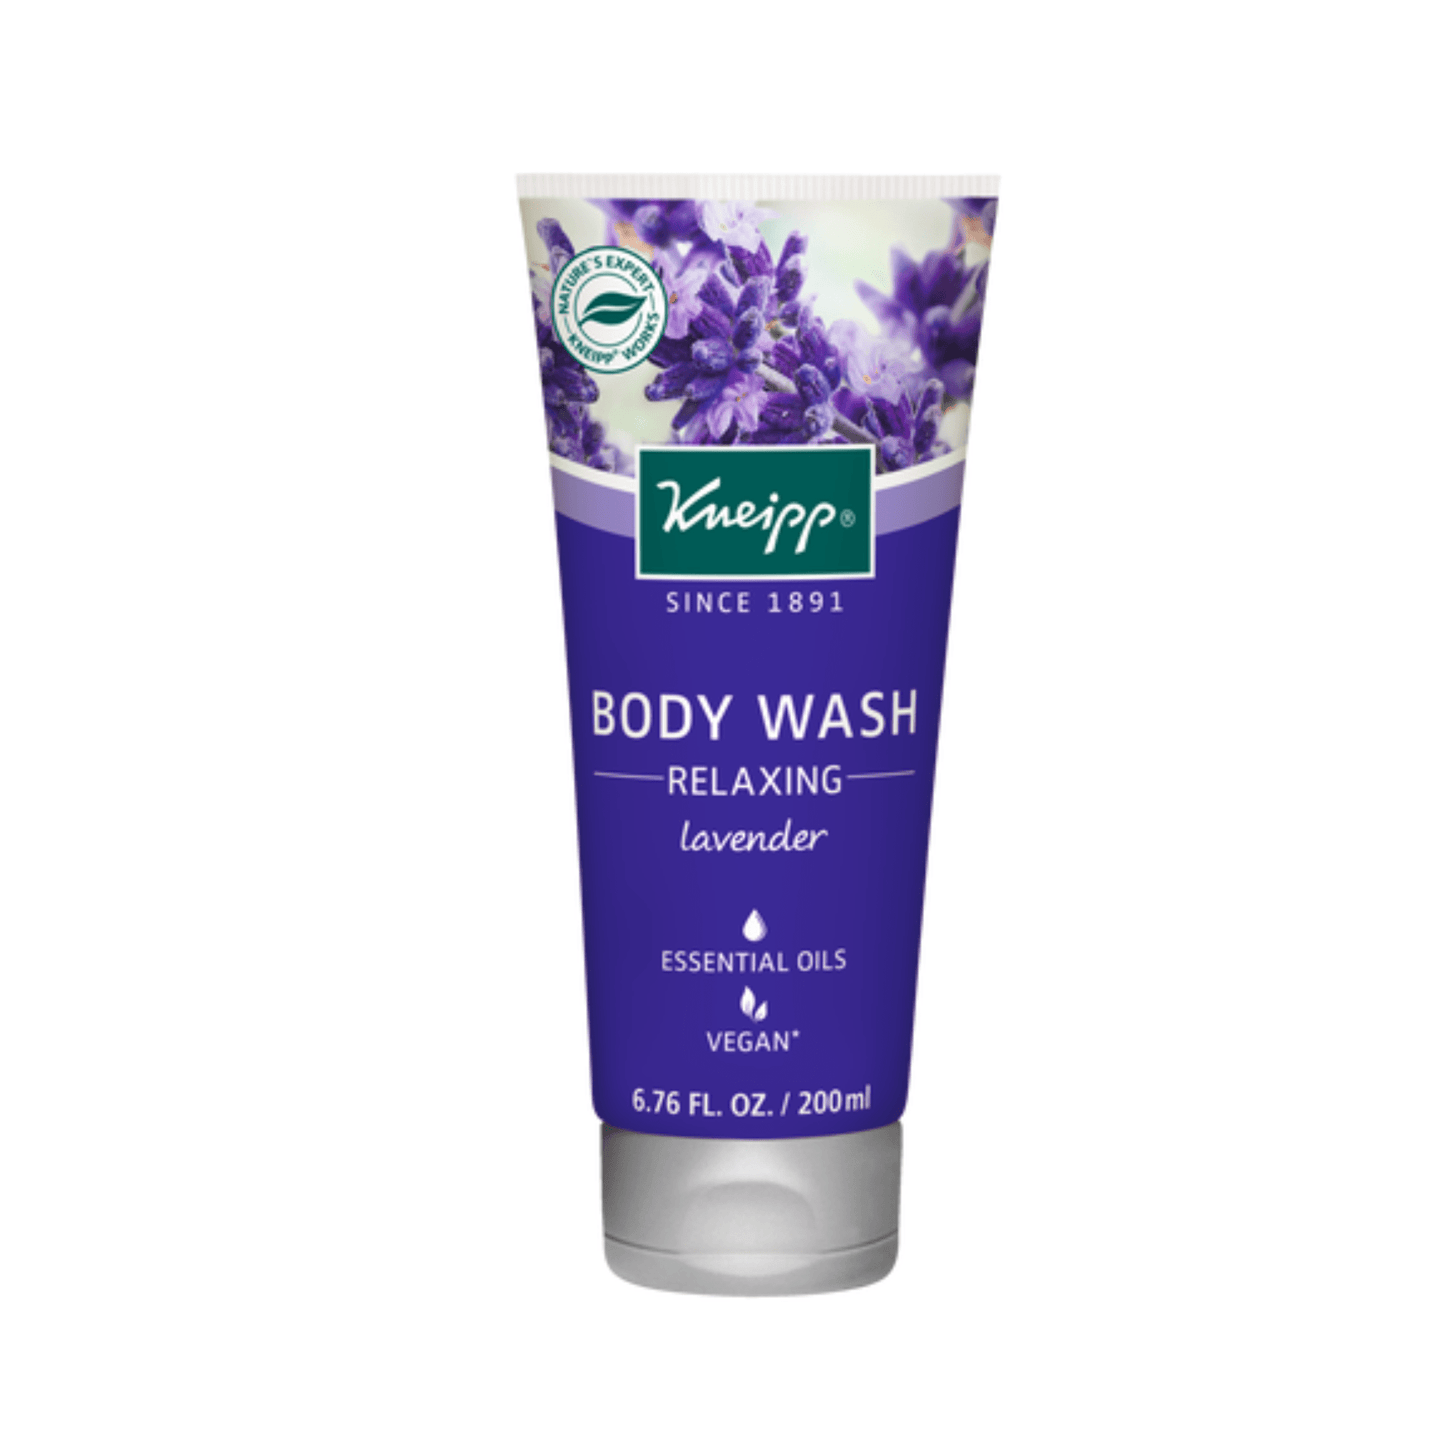 Primary Image of Lavender Relaxing Body Wash